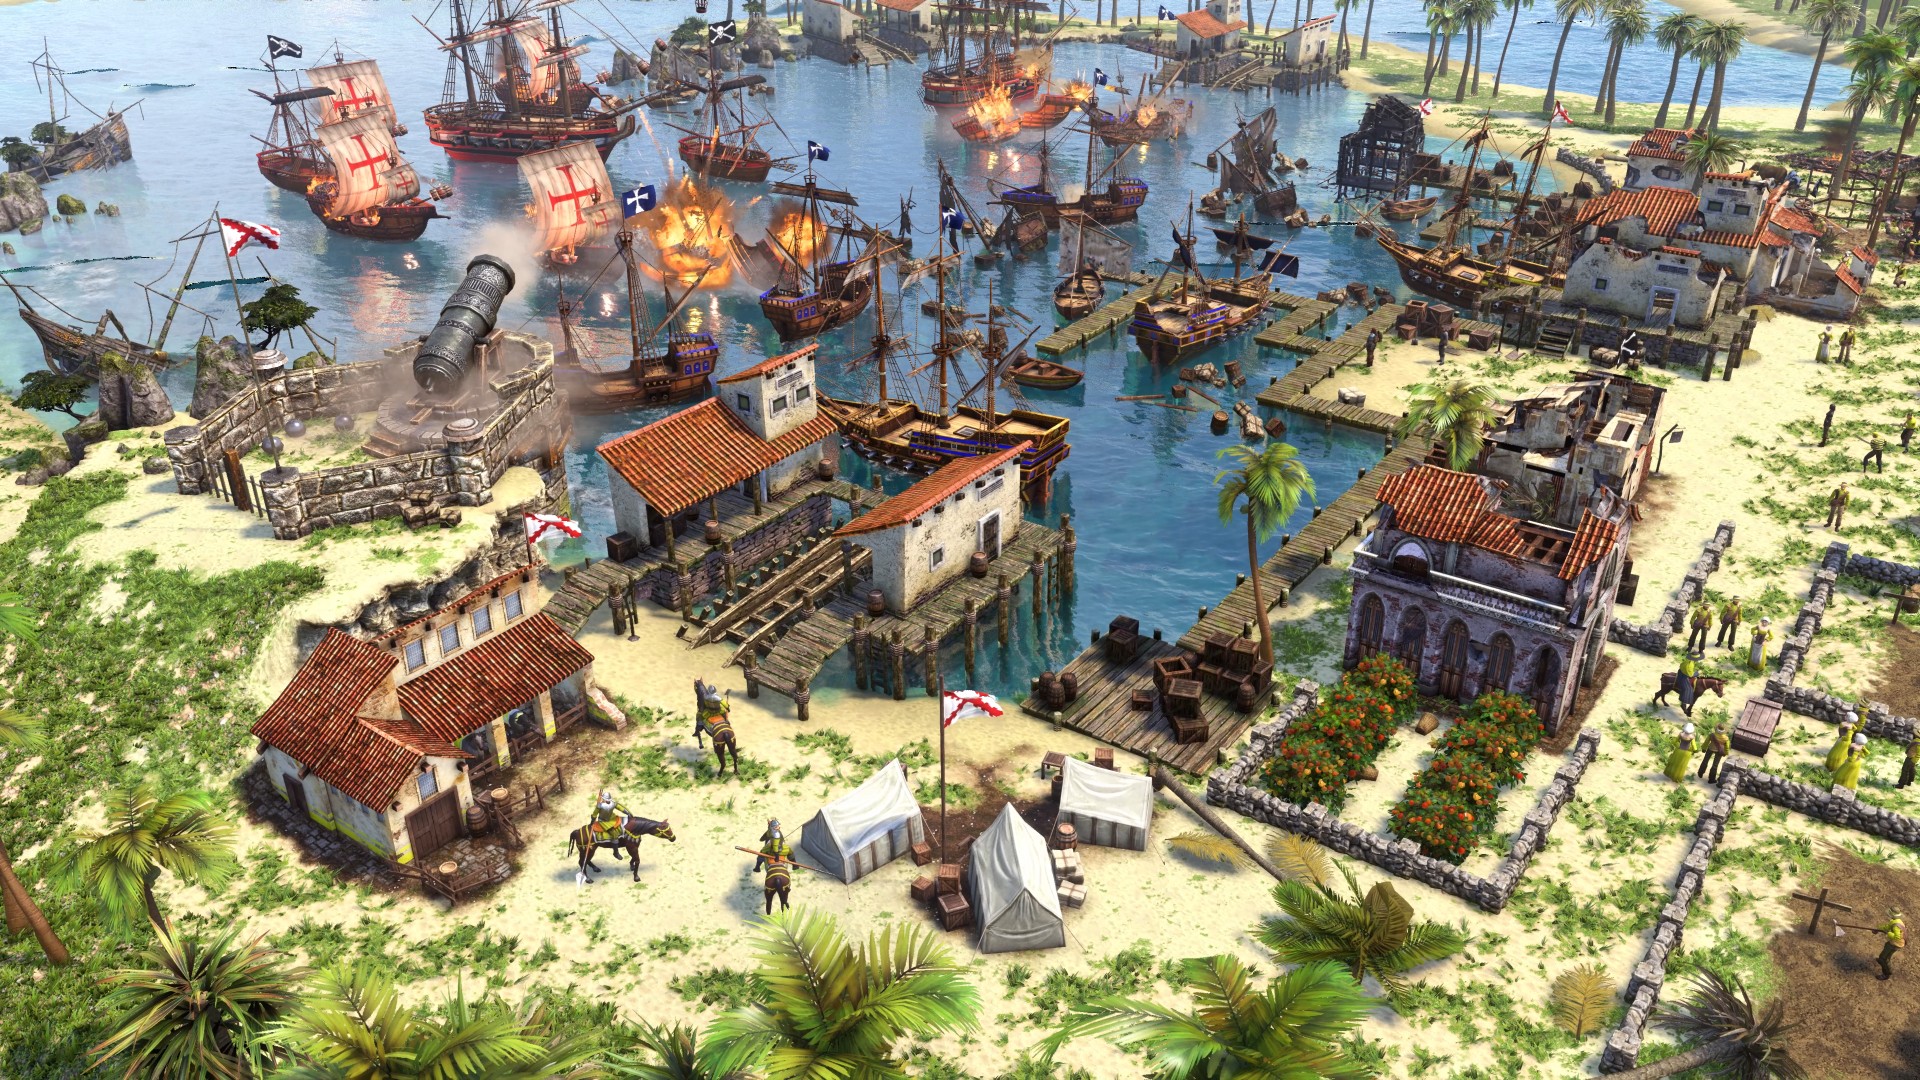 age of empires 2 definitive edition release date xbox one